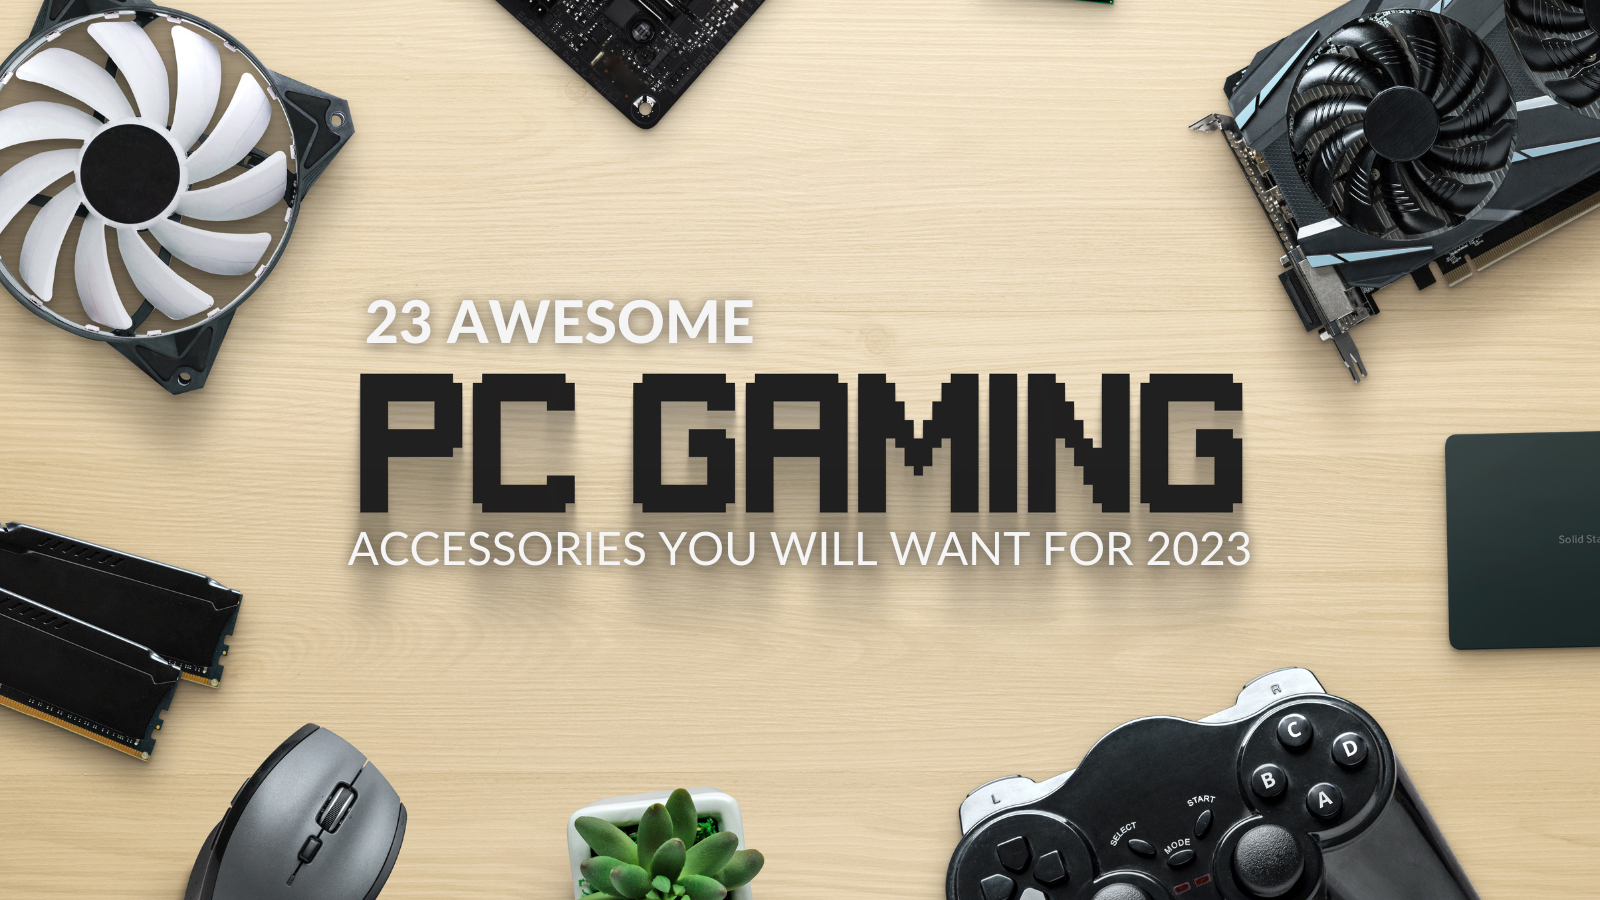 Cool PC Accessories for 2023